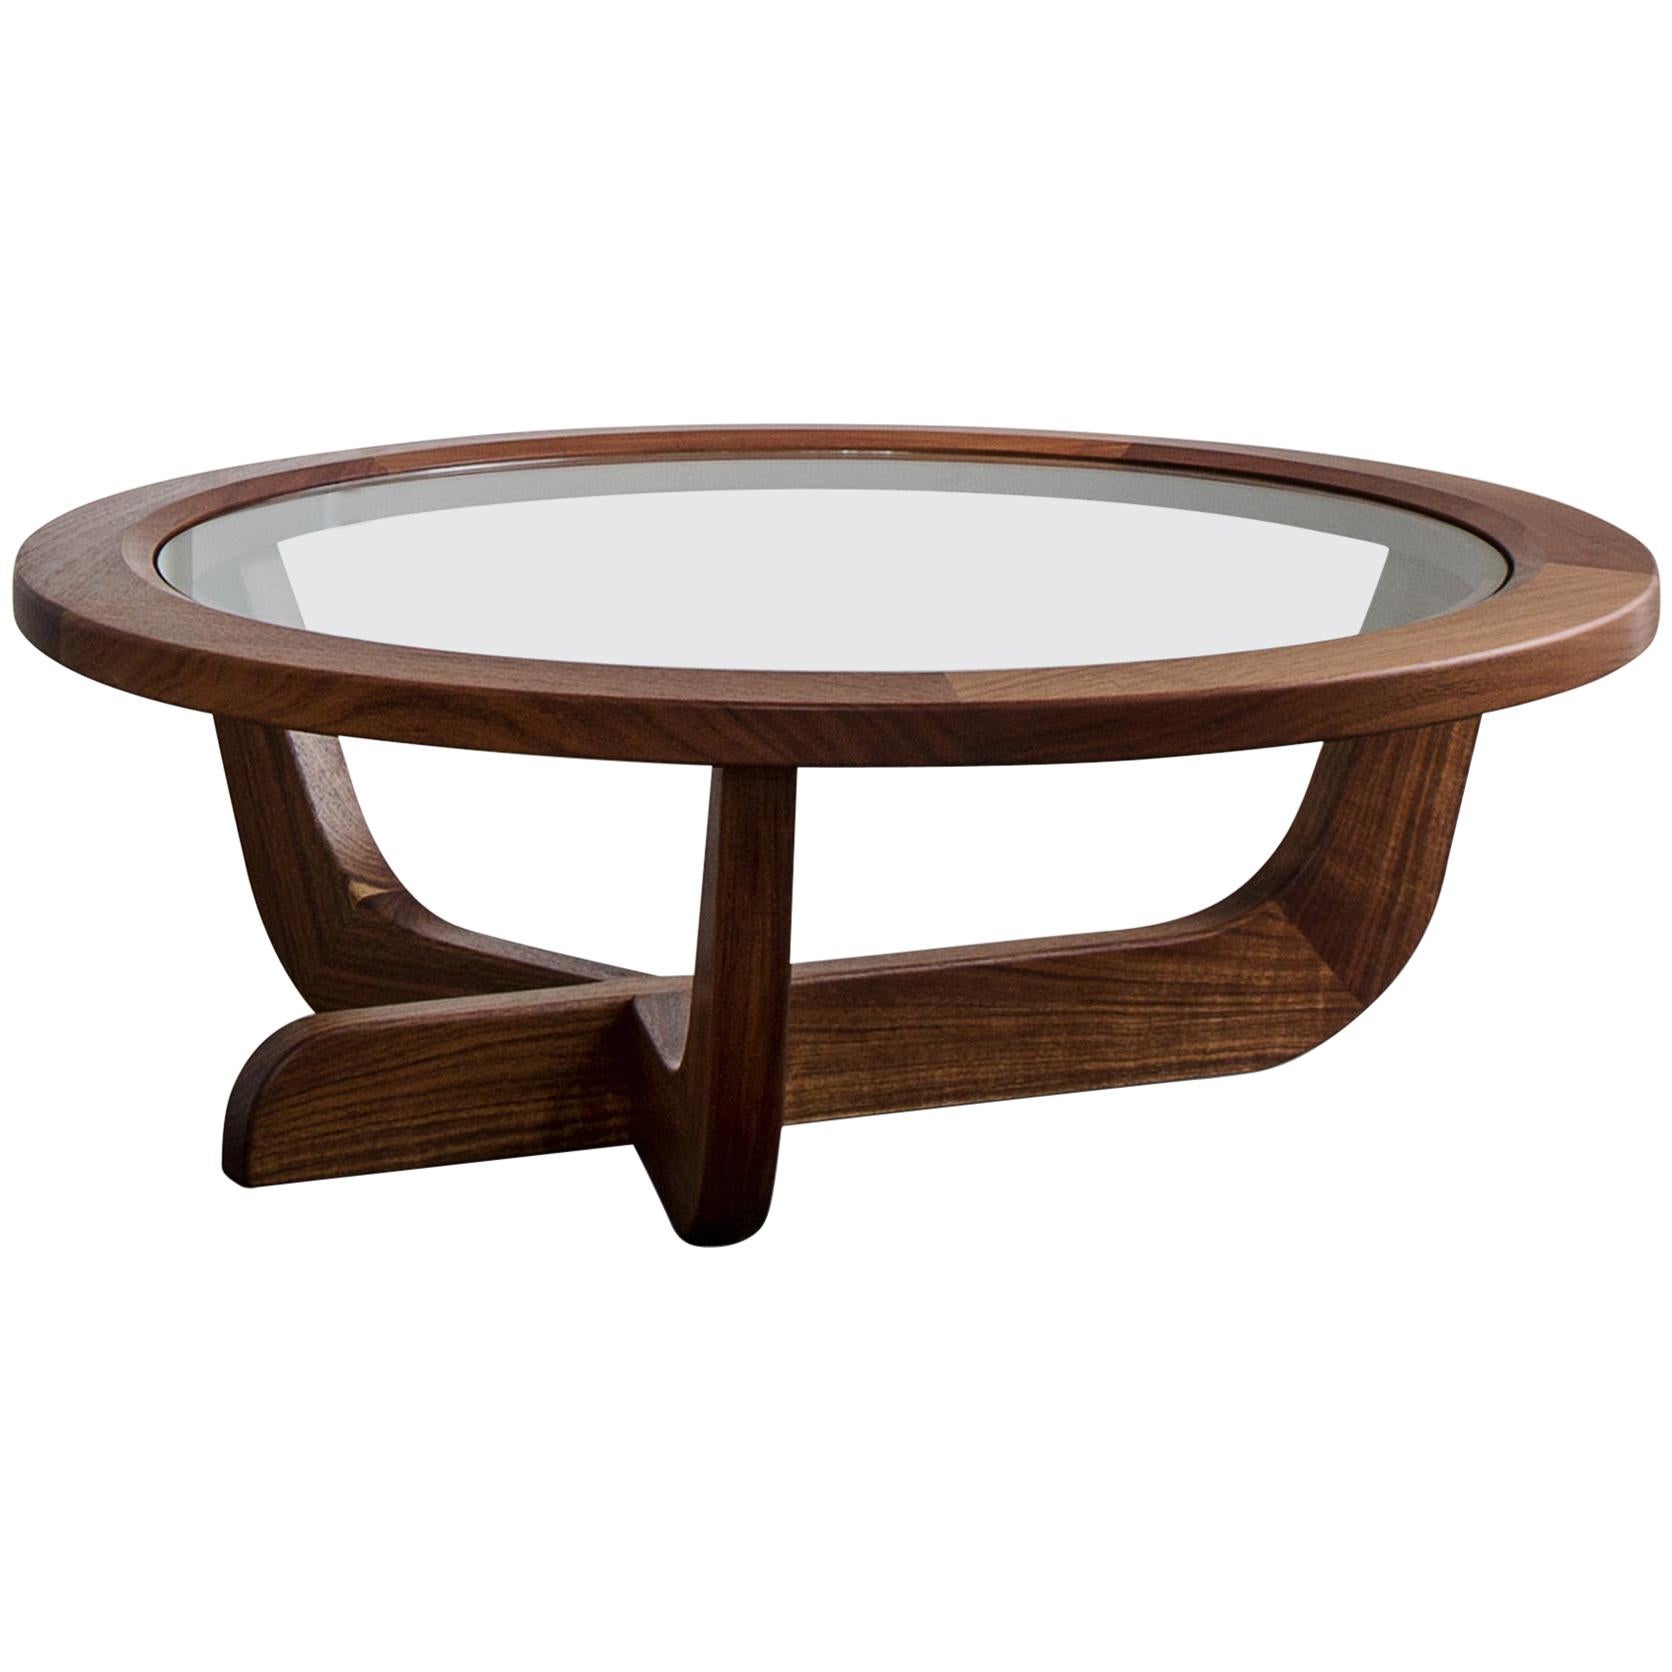 Clara Porset Modernist CP3 Solid Walnut and Glass Coffee Table by Luteca